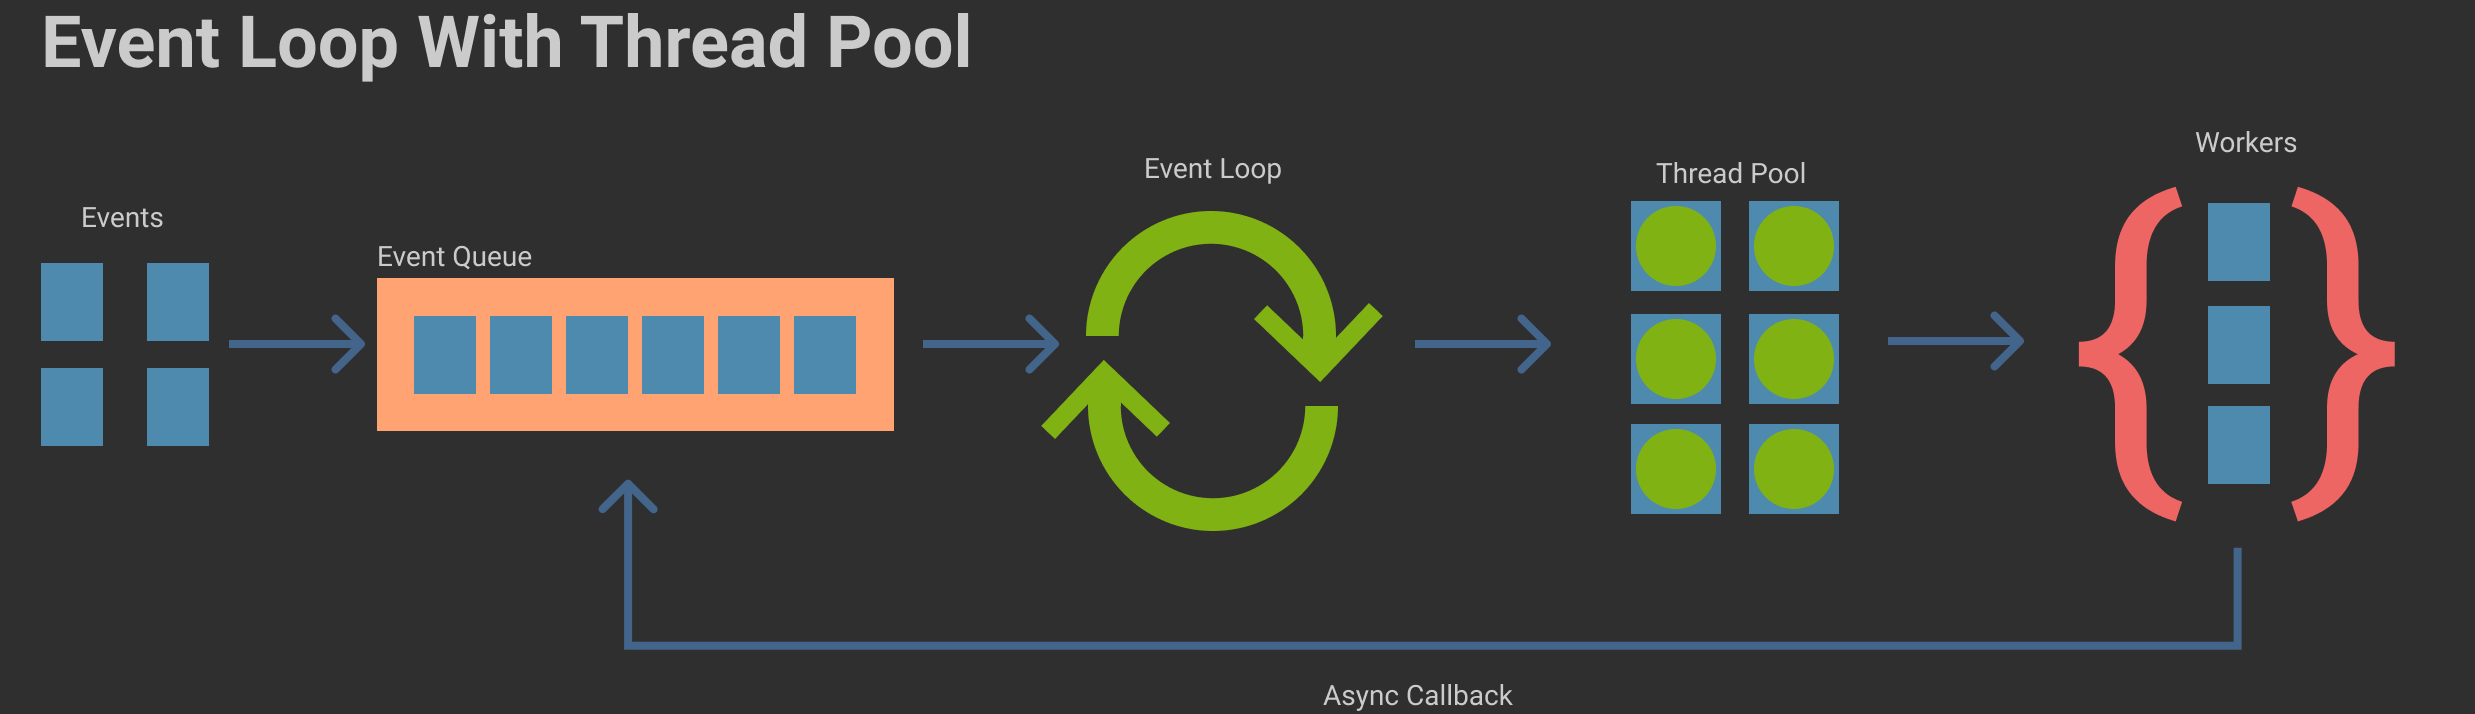 Event Loop with Thread Pool